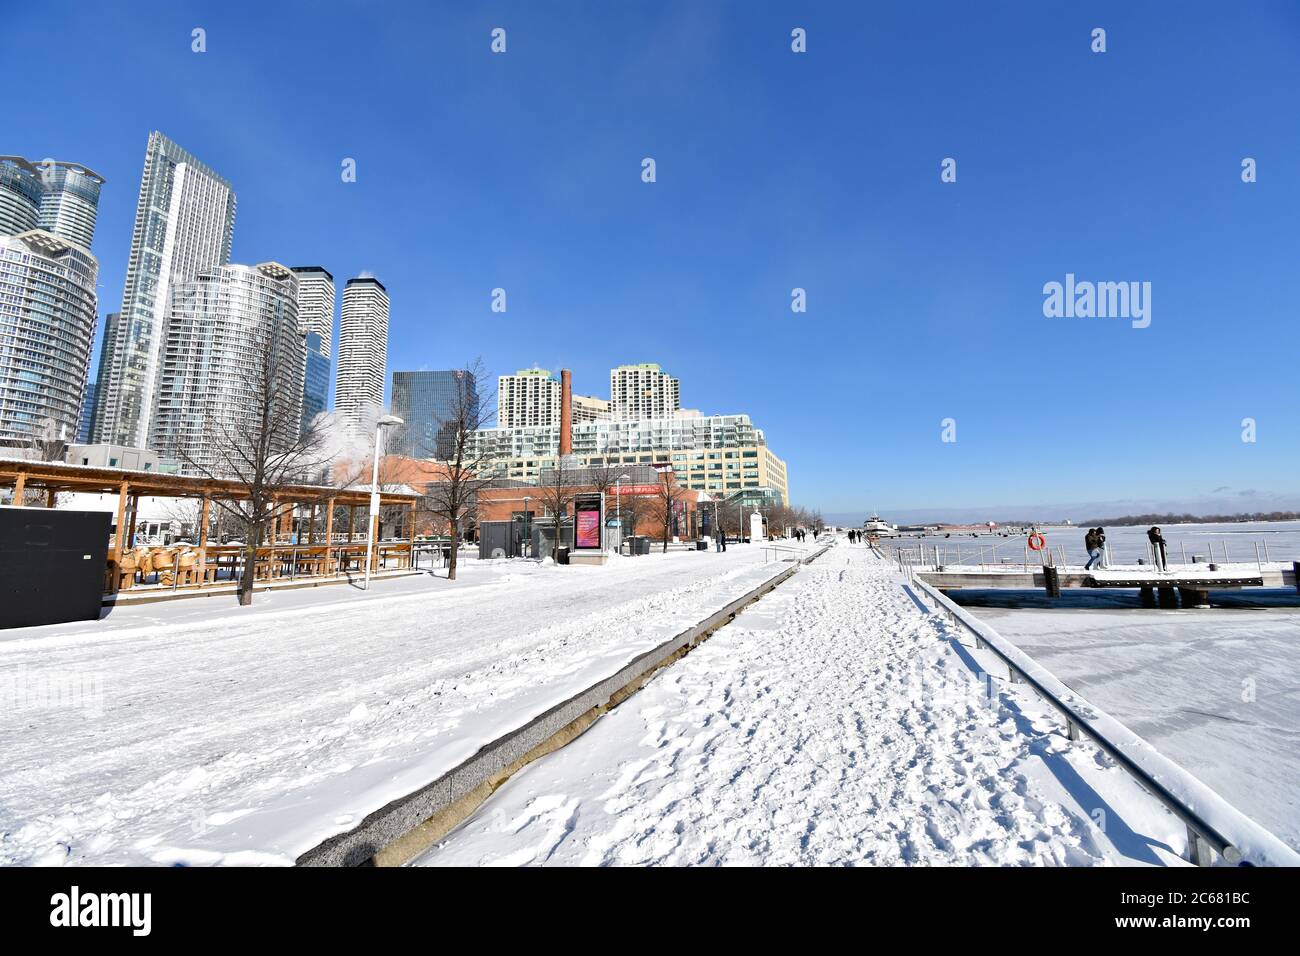 The Waterfront Trail at the Harbour Front Centre in Toronto.  Snow is on the ground and Lake Ontario has frozen over in the winter weather. Stock Photo